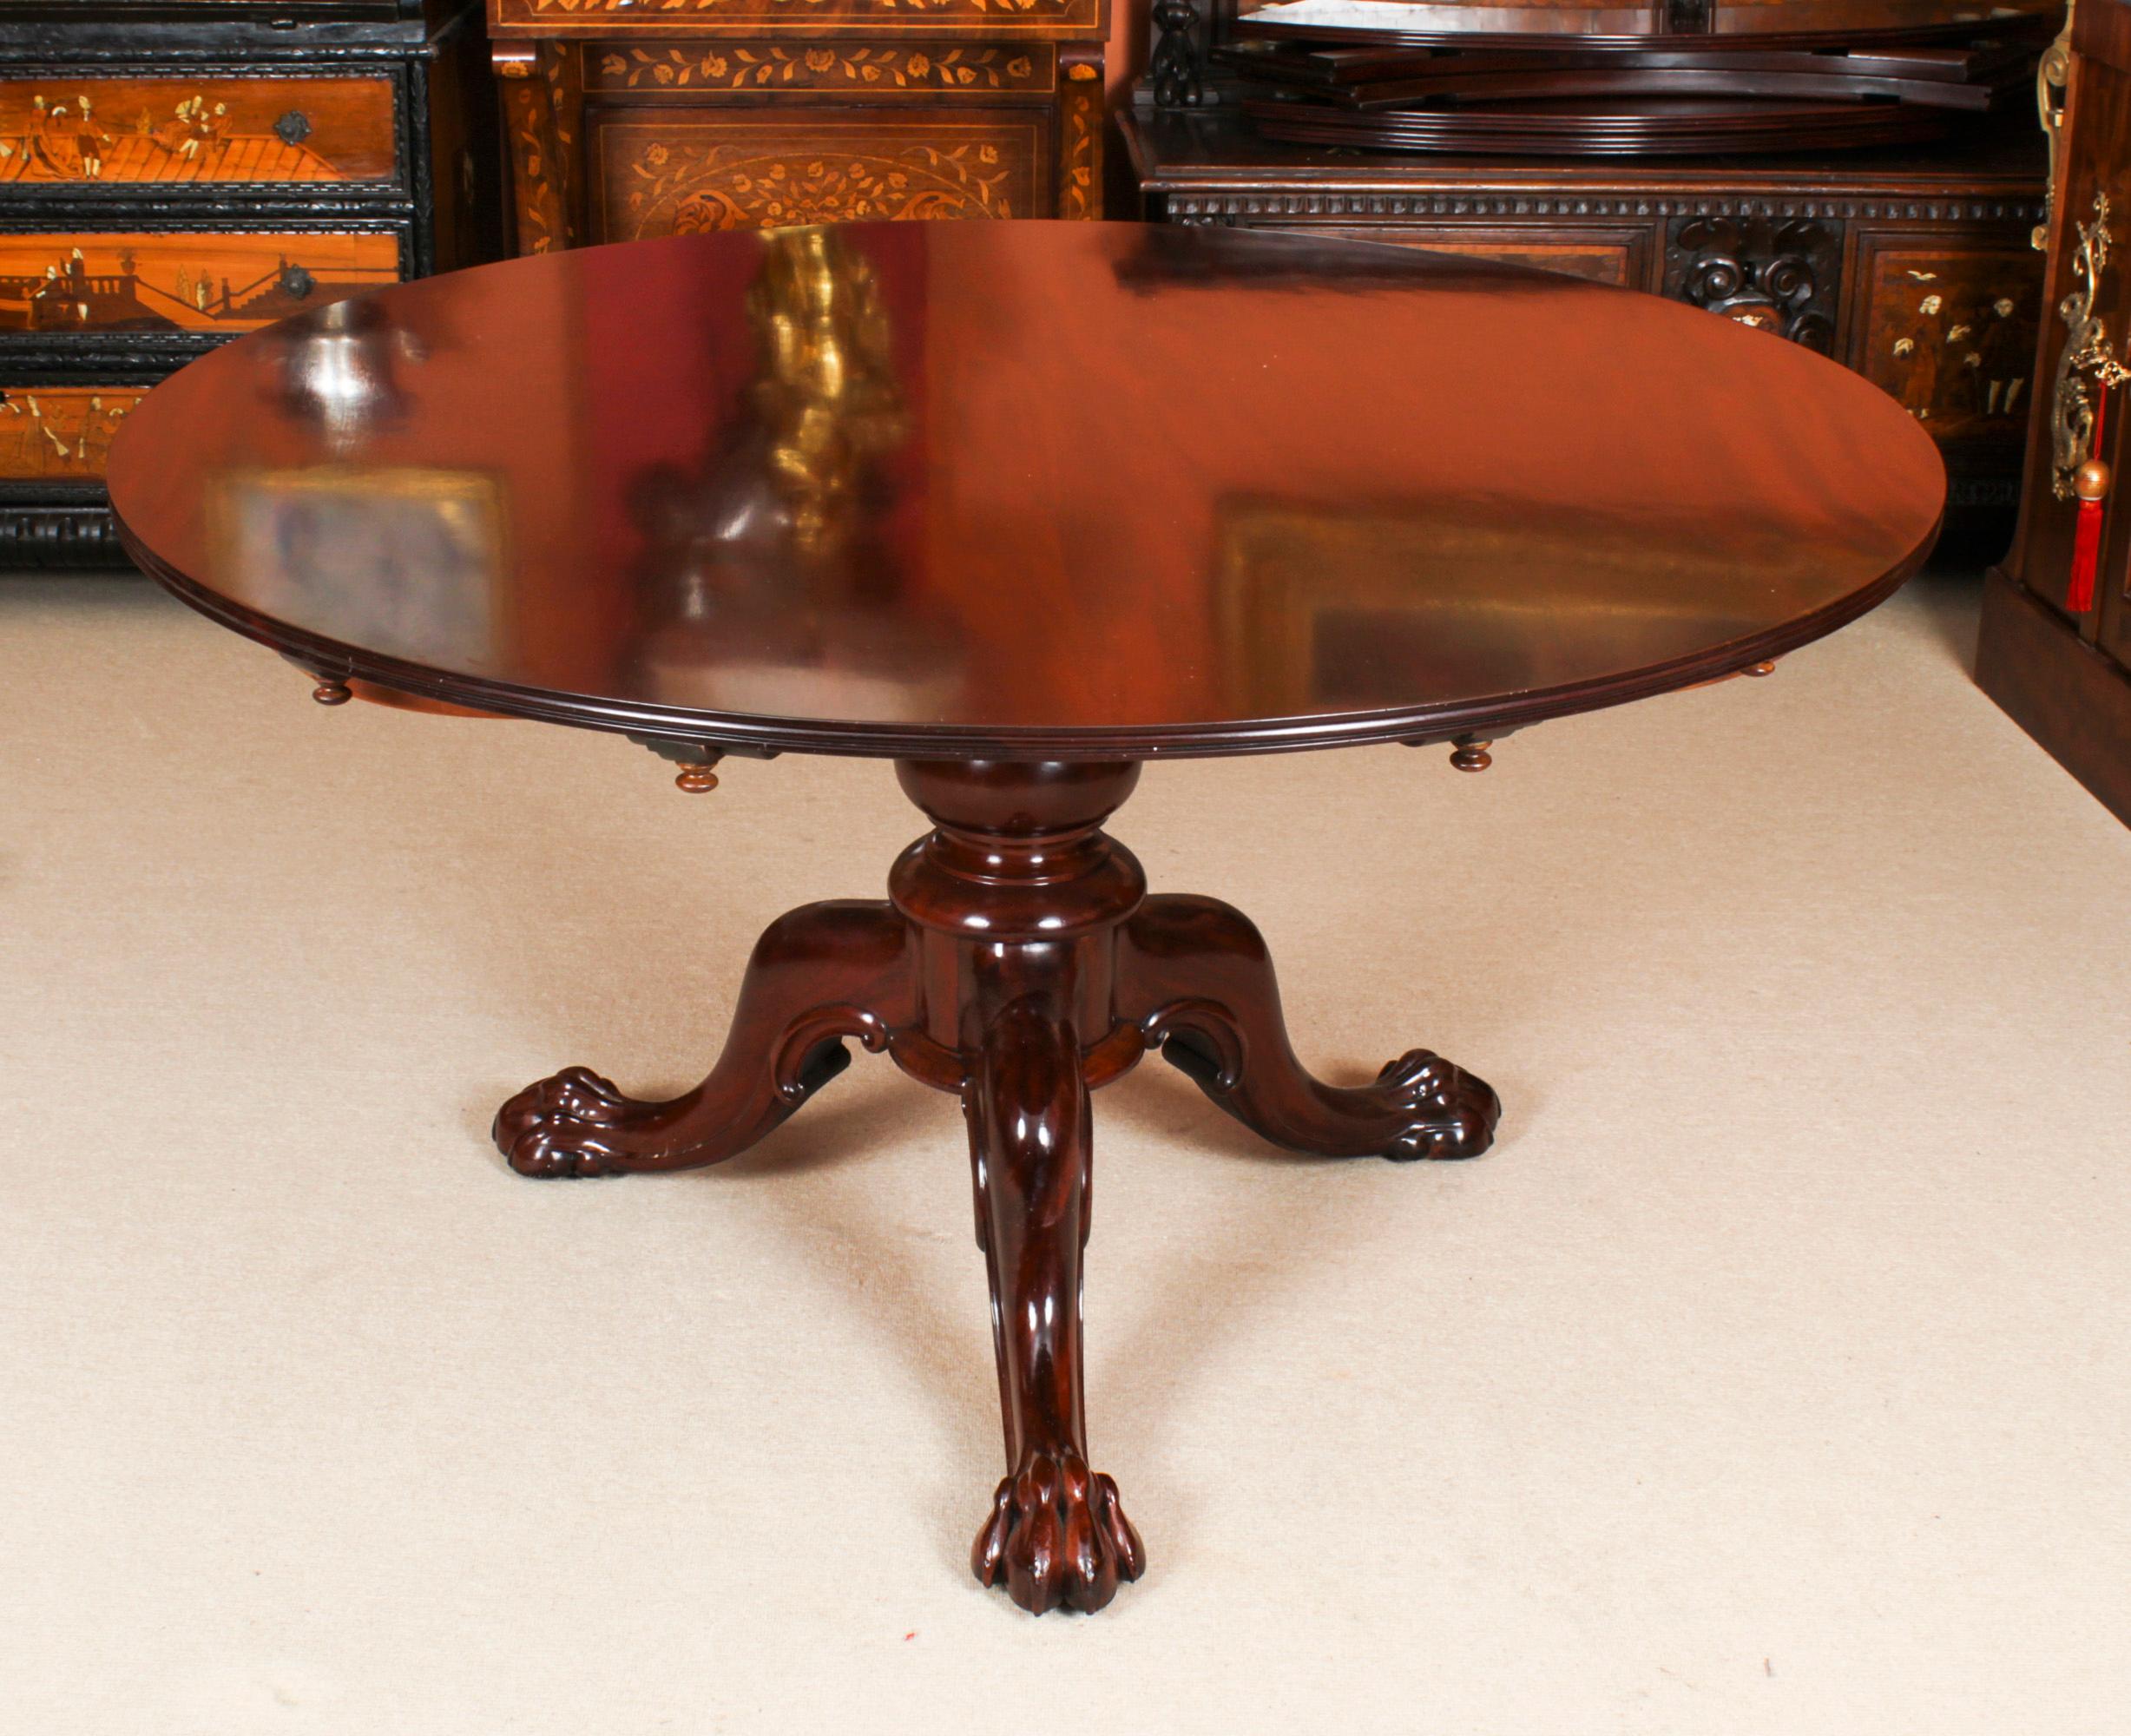 This is a beautiful antique William IV flame mahogany circular extending dining table attributed to Gillows and dating from Circa 1835.
 
In the manner of Gillows, the circular reeded top has five outer leaves that can be added or removed as